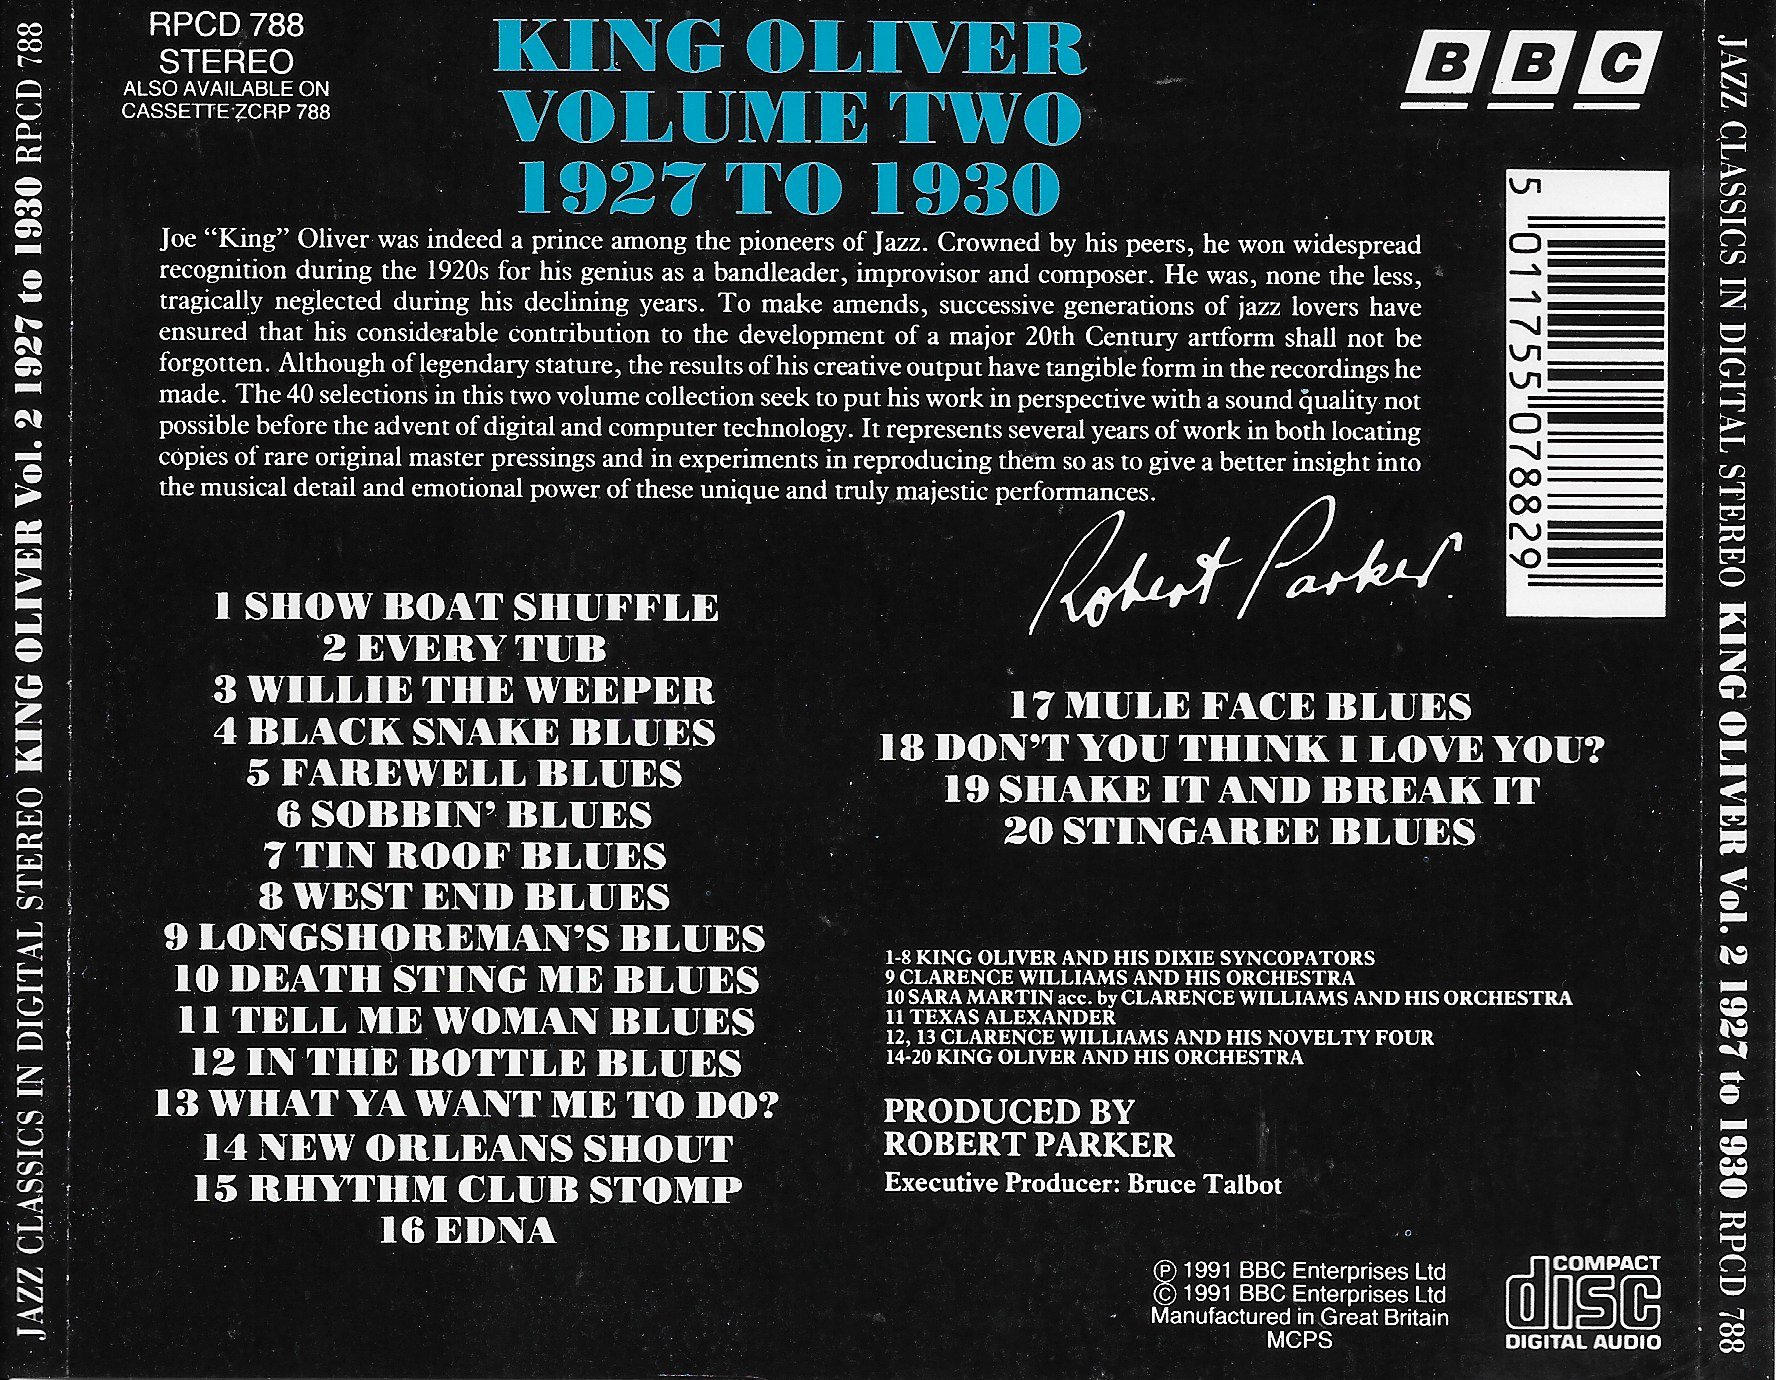 Picture of RPCD 788 King Oliver - Volume 2 1927 - 1930 by artist Joe Oliver from the BBC records and Tapes library